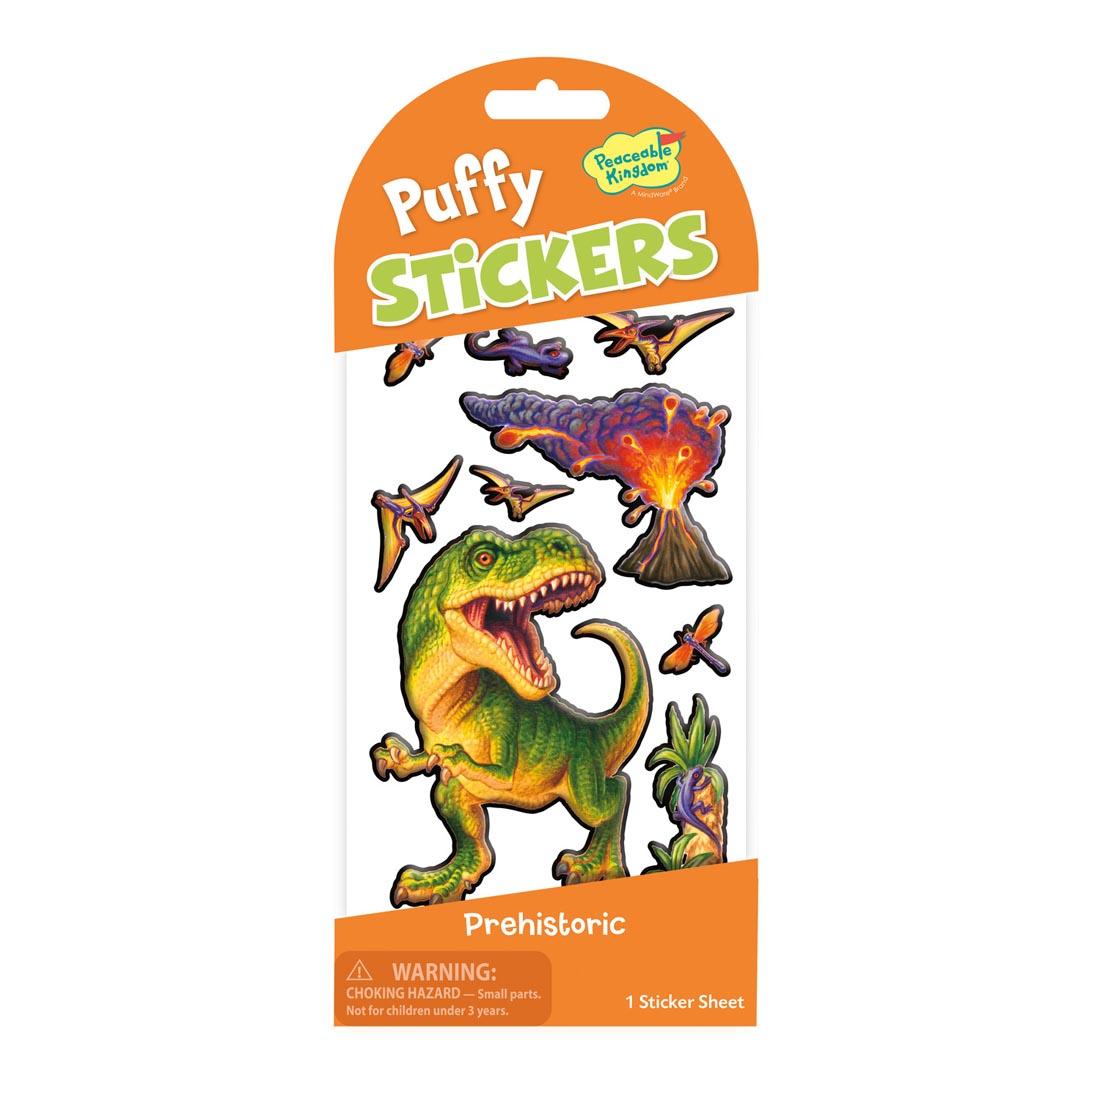 Prehistoric Puffy Stickers by Peaceable Kingdom